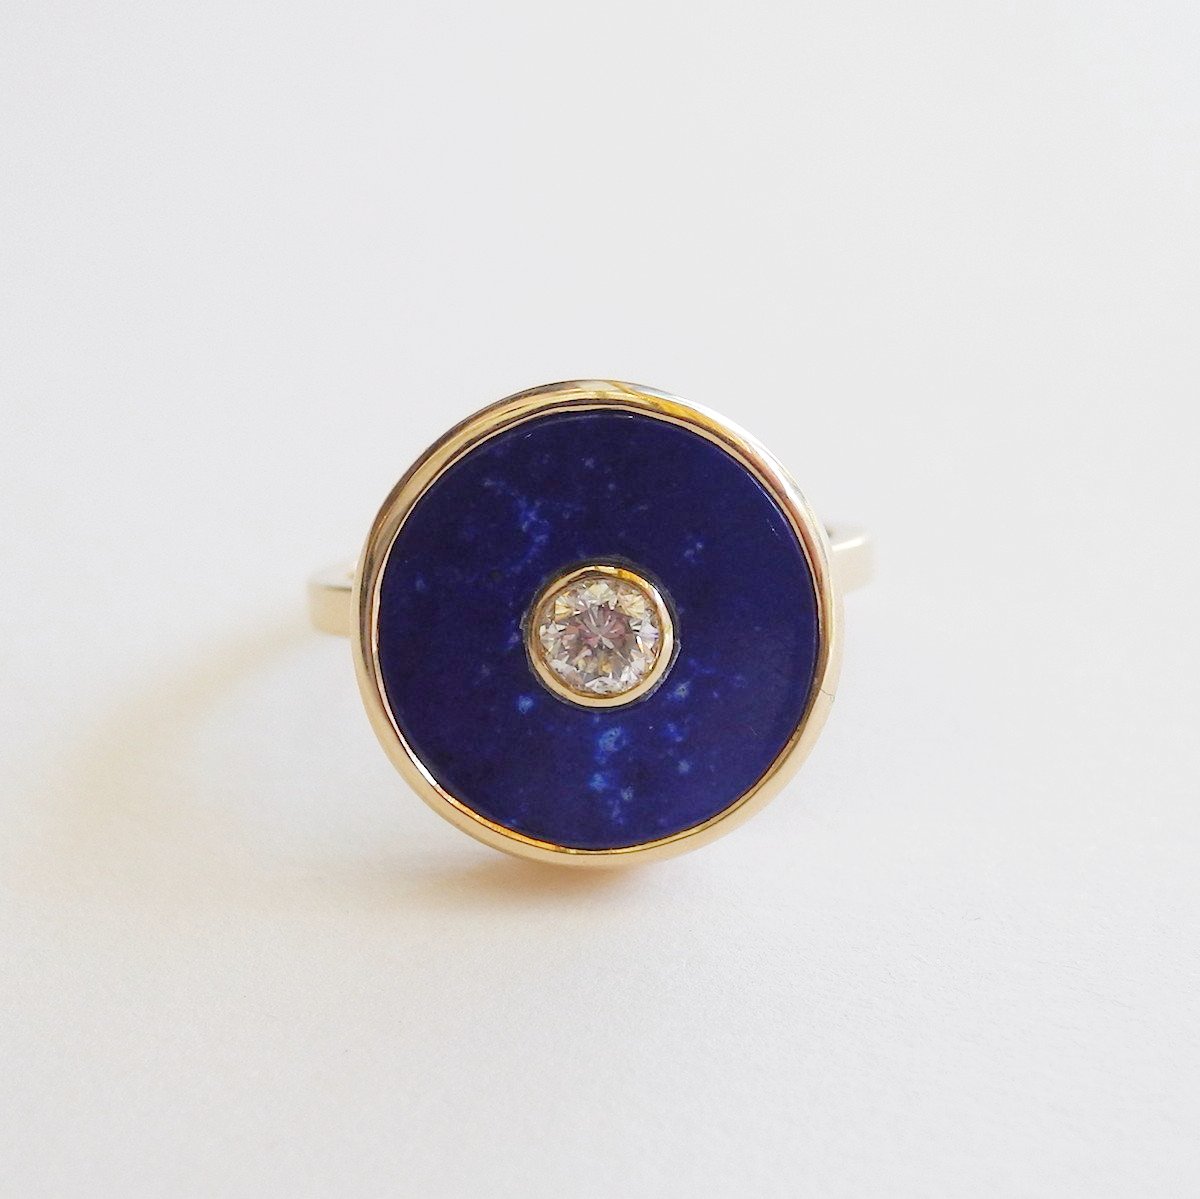 Diamond and Lapis Europa Ring, Ring, Liz Phillips, Collyer's Mansion - Collyer's Mansion